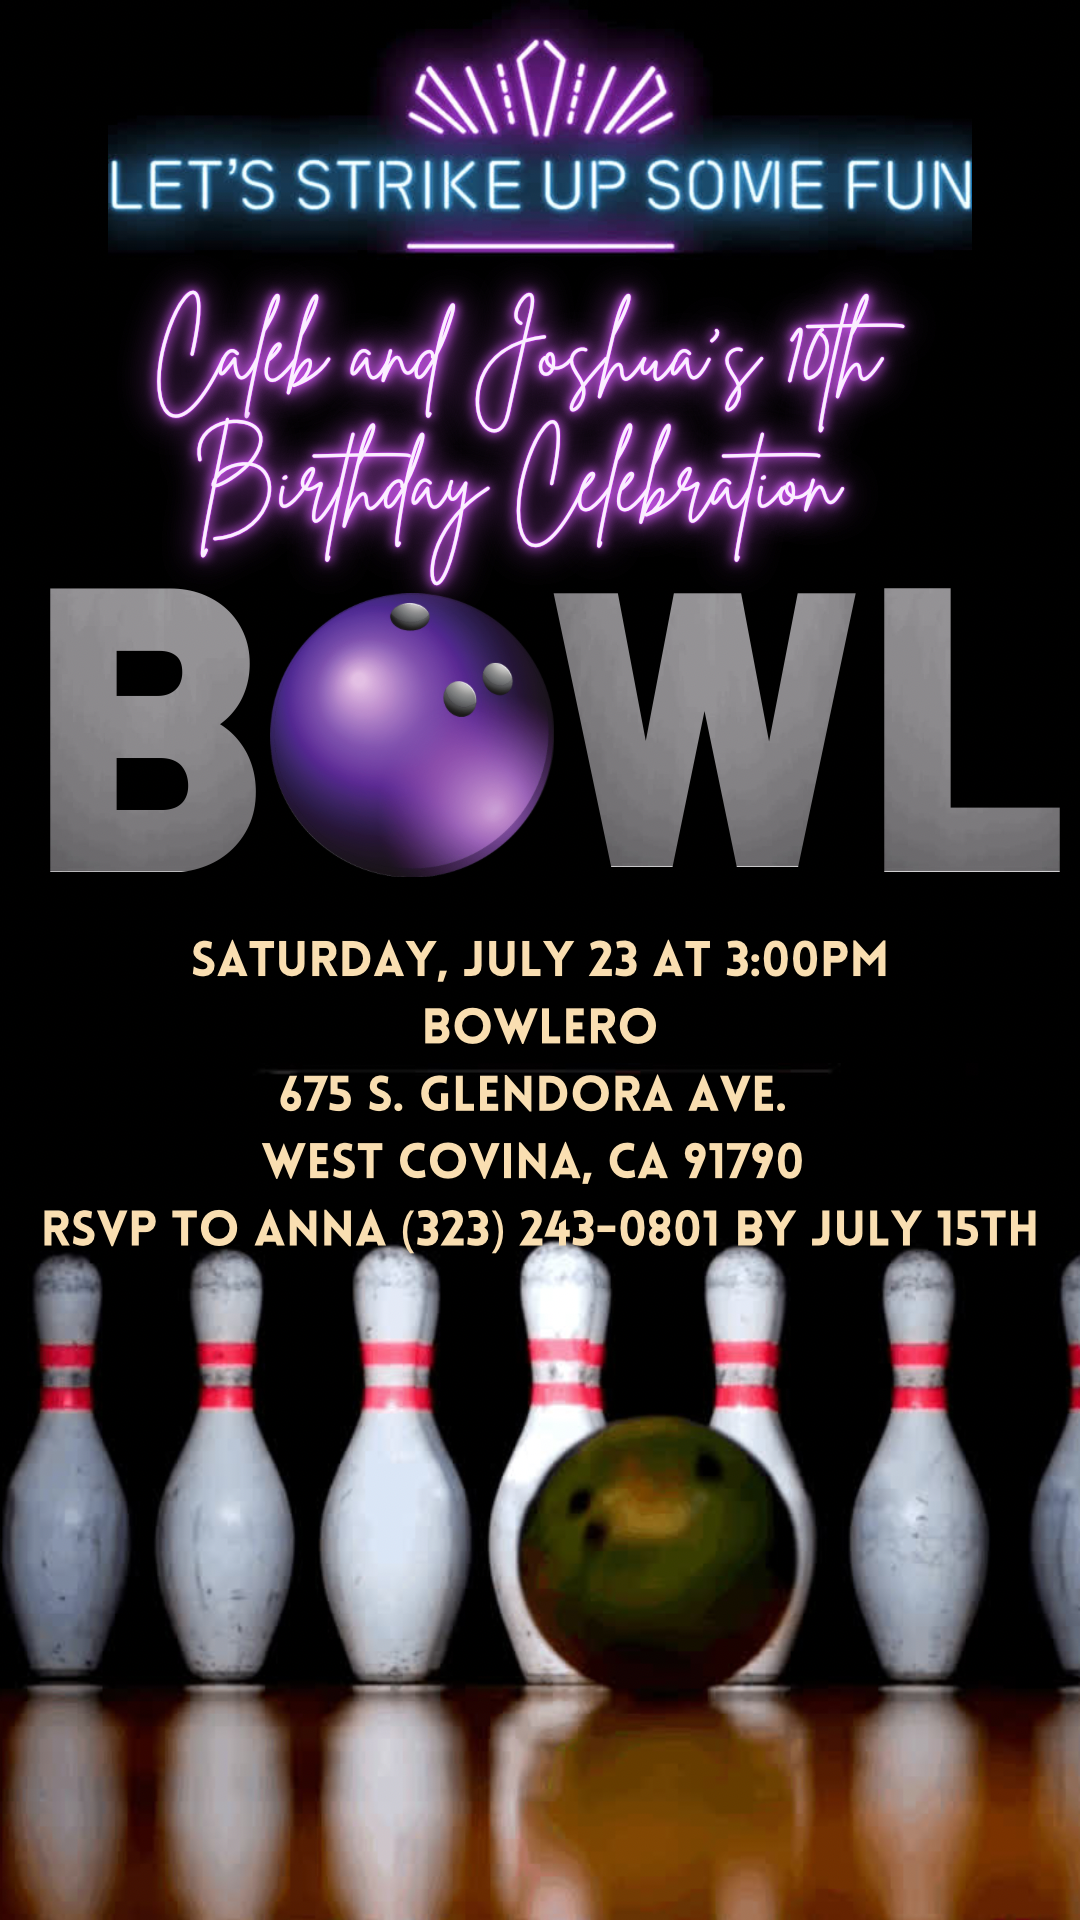 Bowling Video Invitation, Let’s Strike up some fun Invitation, Bowling Alley Invite